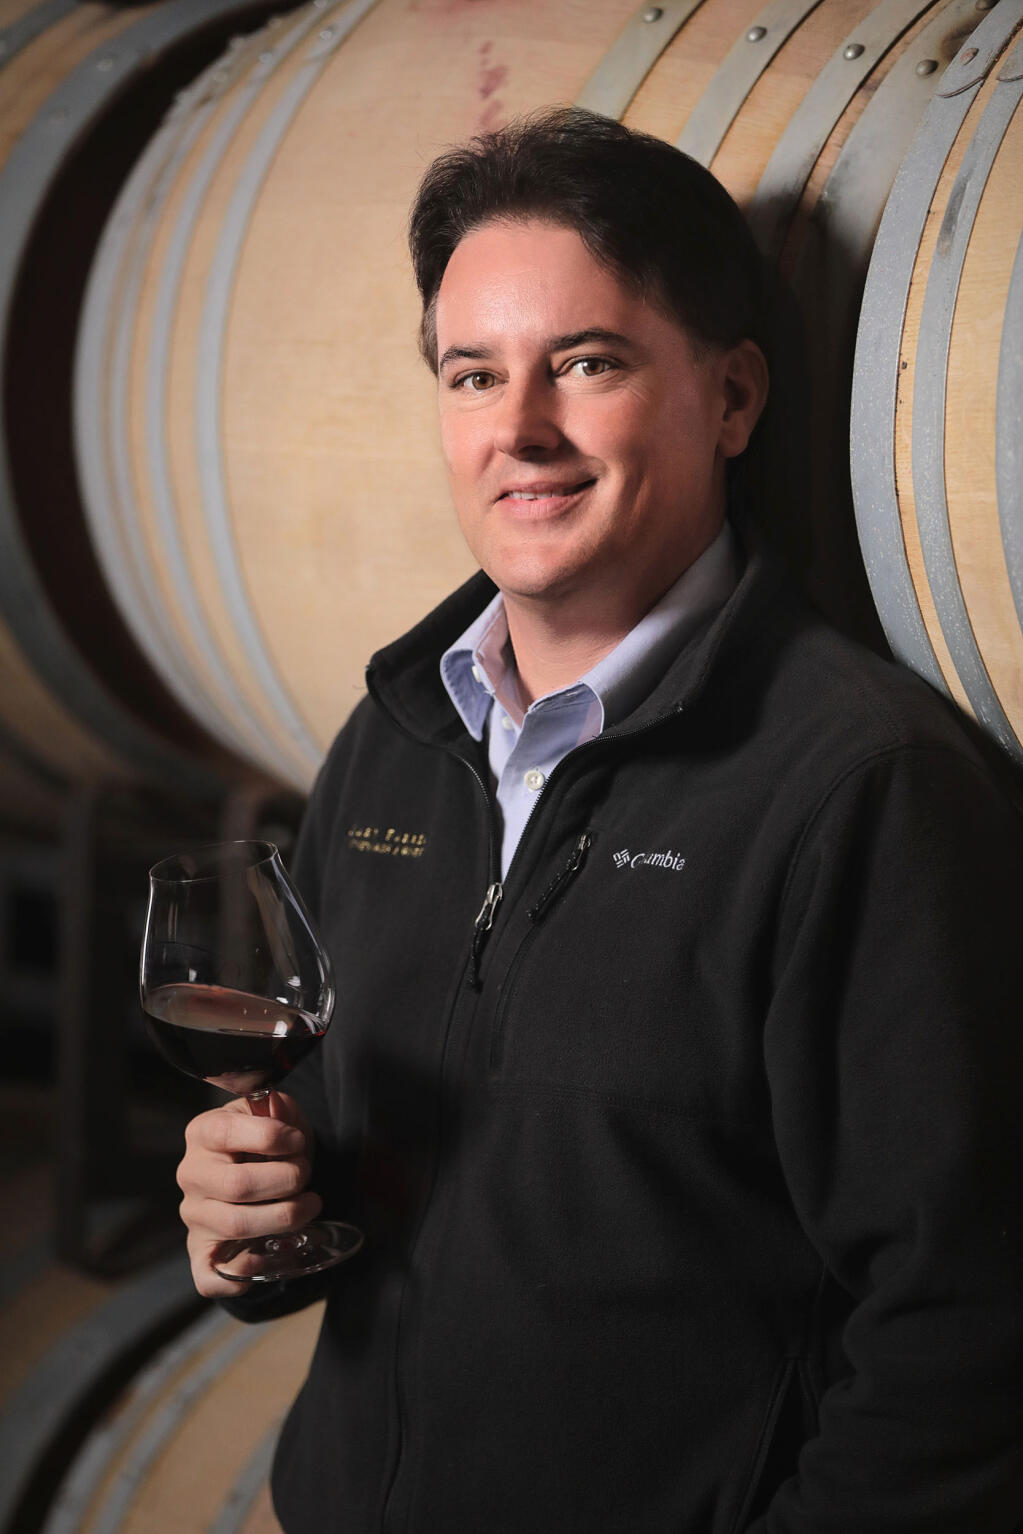 Brent McKoy started working at Healdsburg’s Gary Farrell Winery in 2005. (Courtesy: Gary Farrell Winery)